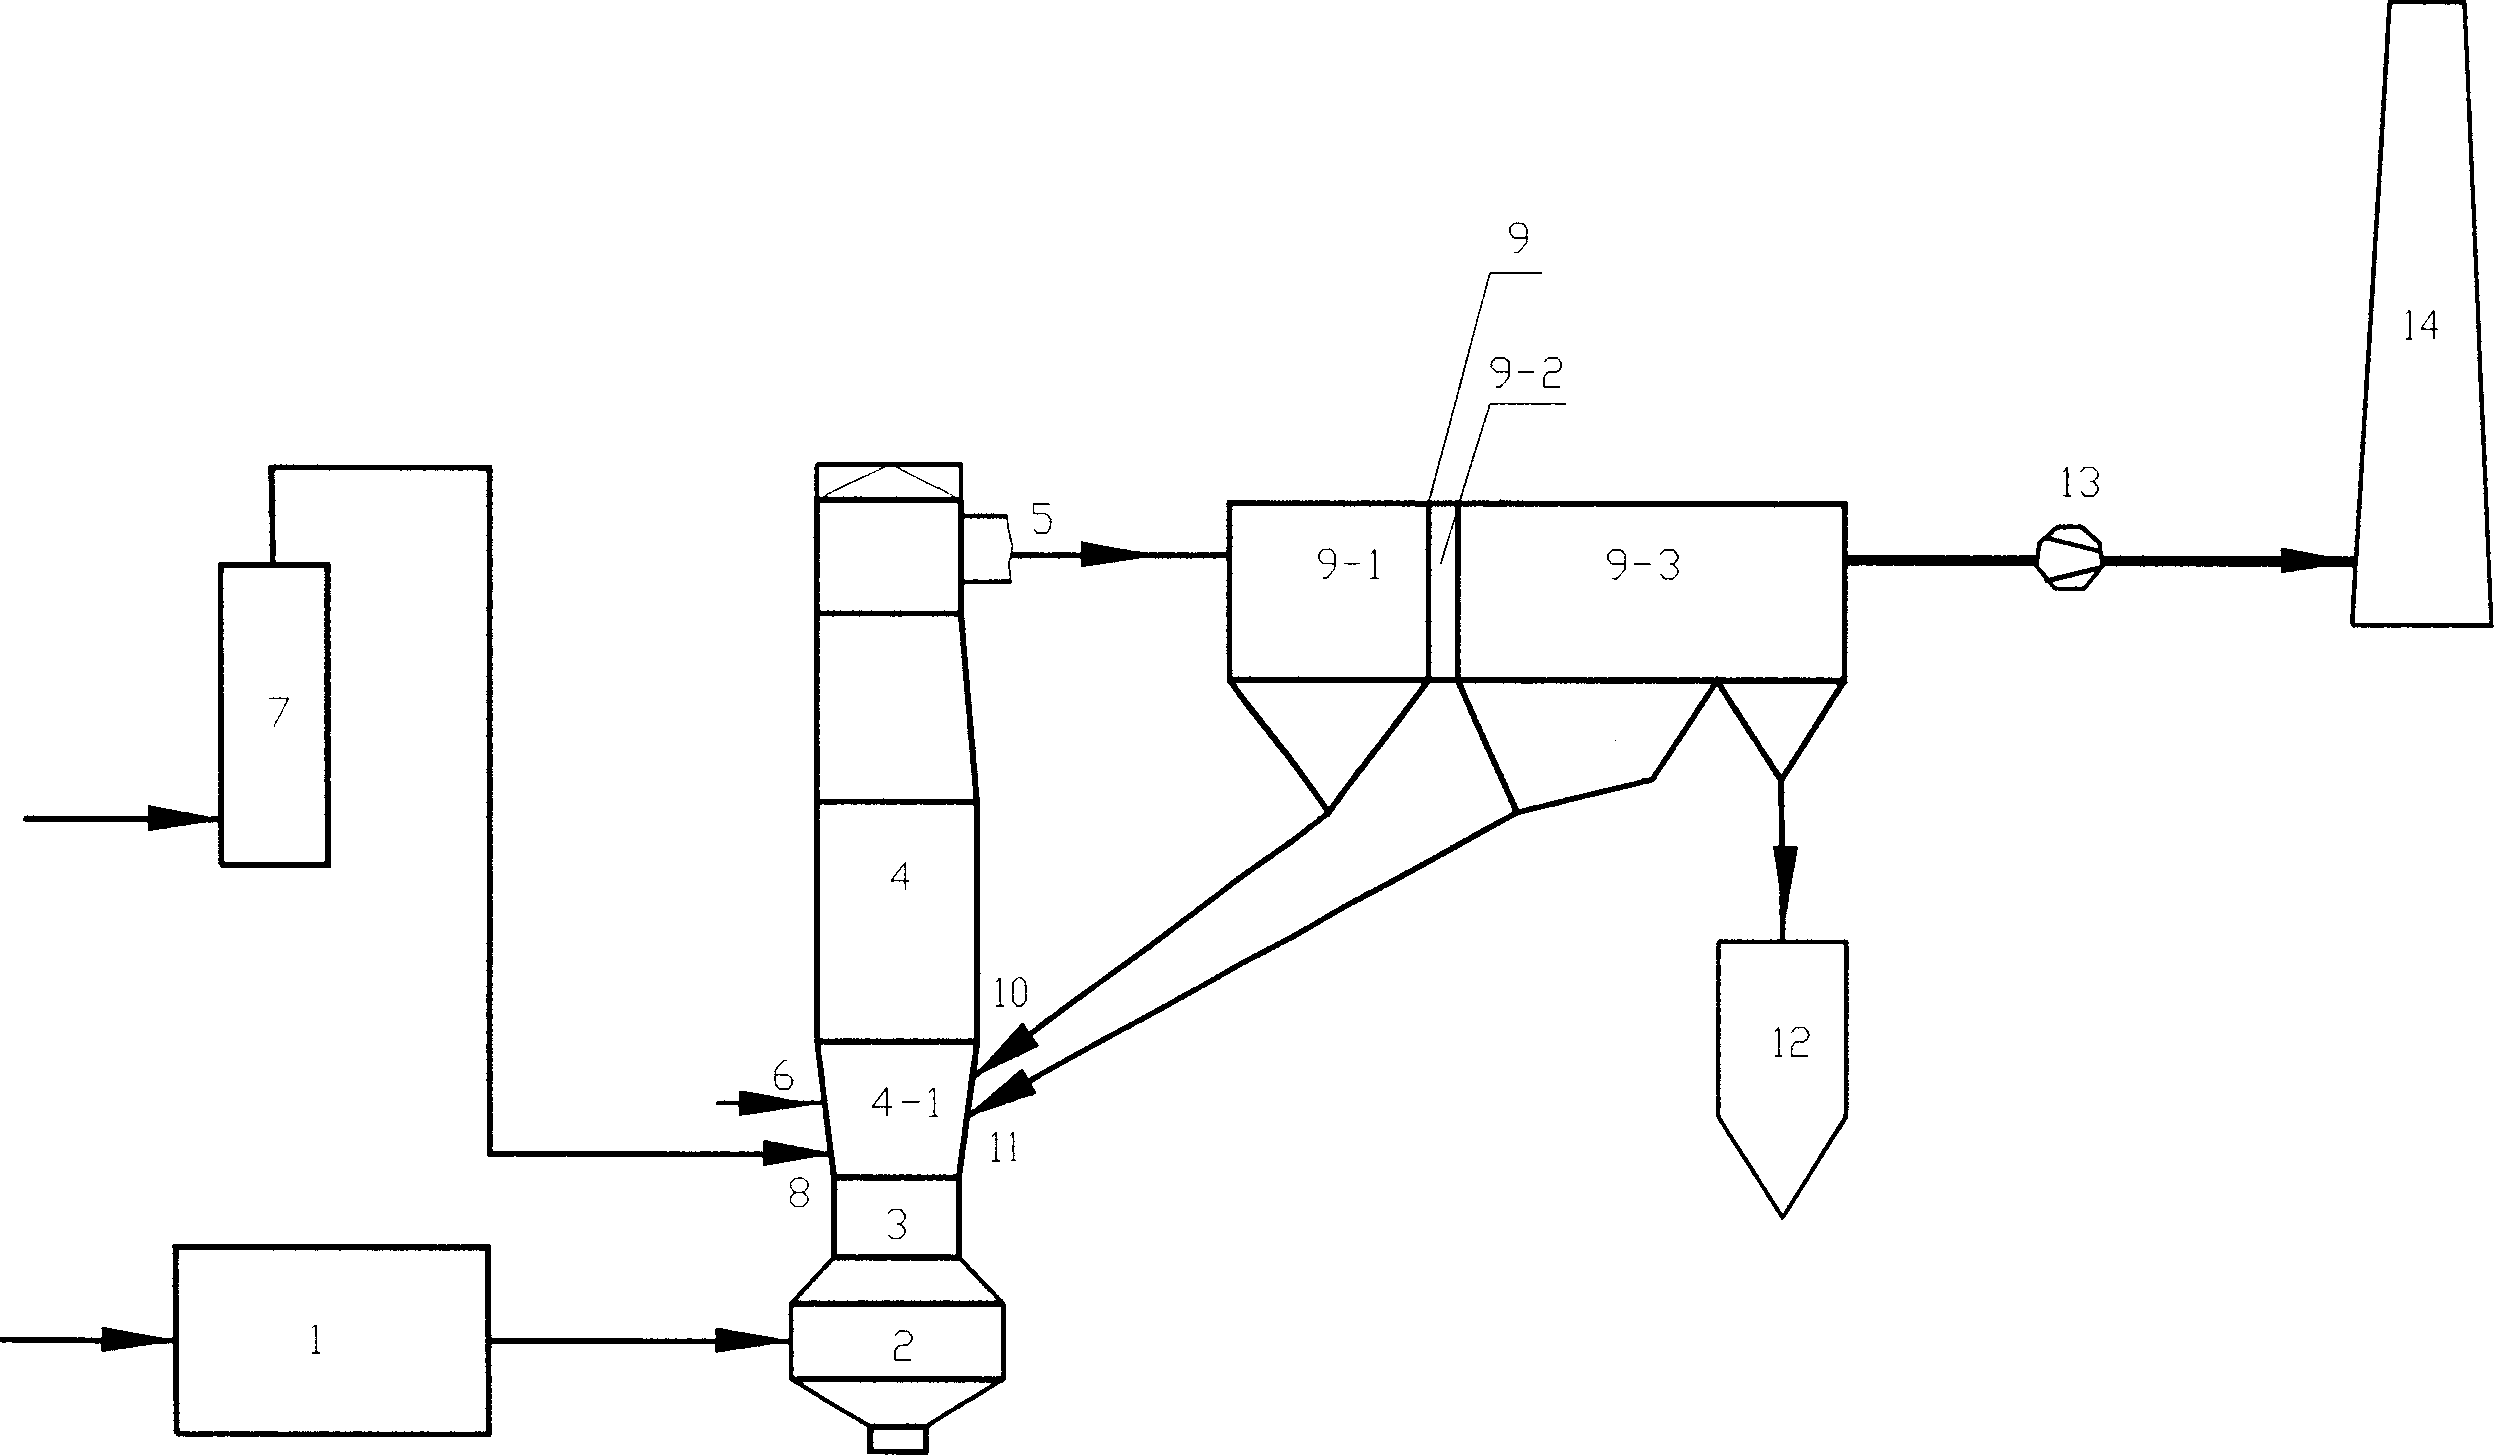 Cyclic fluidizing dry flue desurlfurizing and duct collecting process by electric bag dust collector